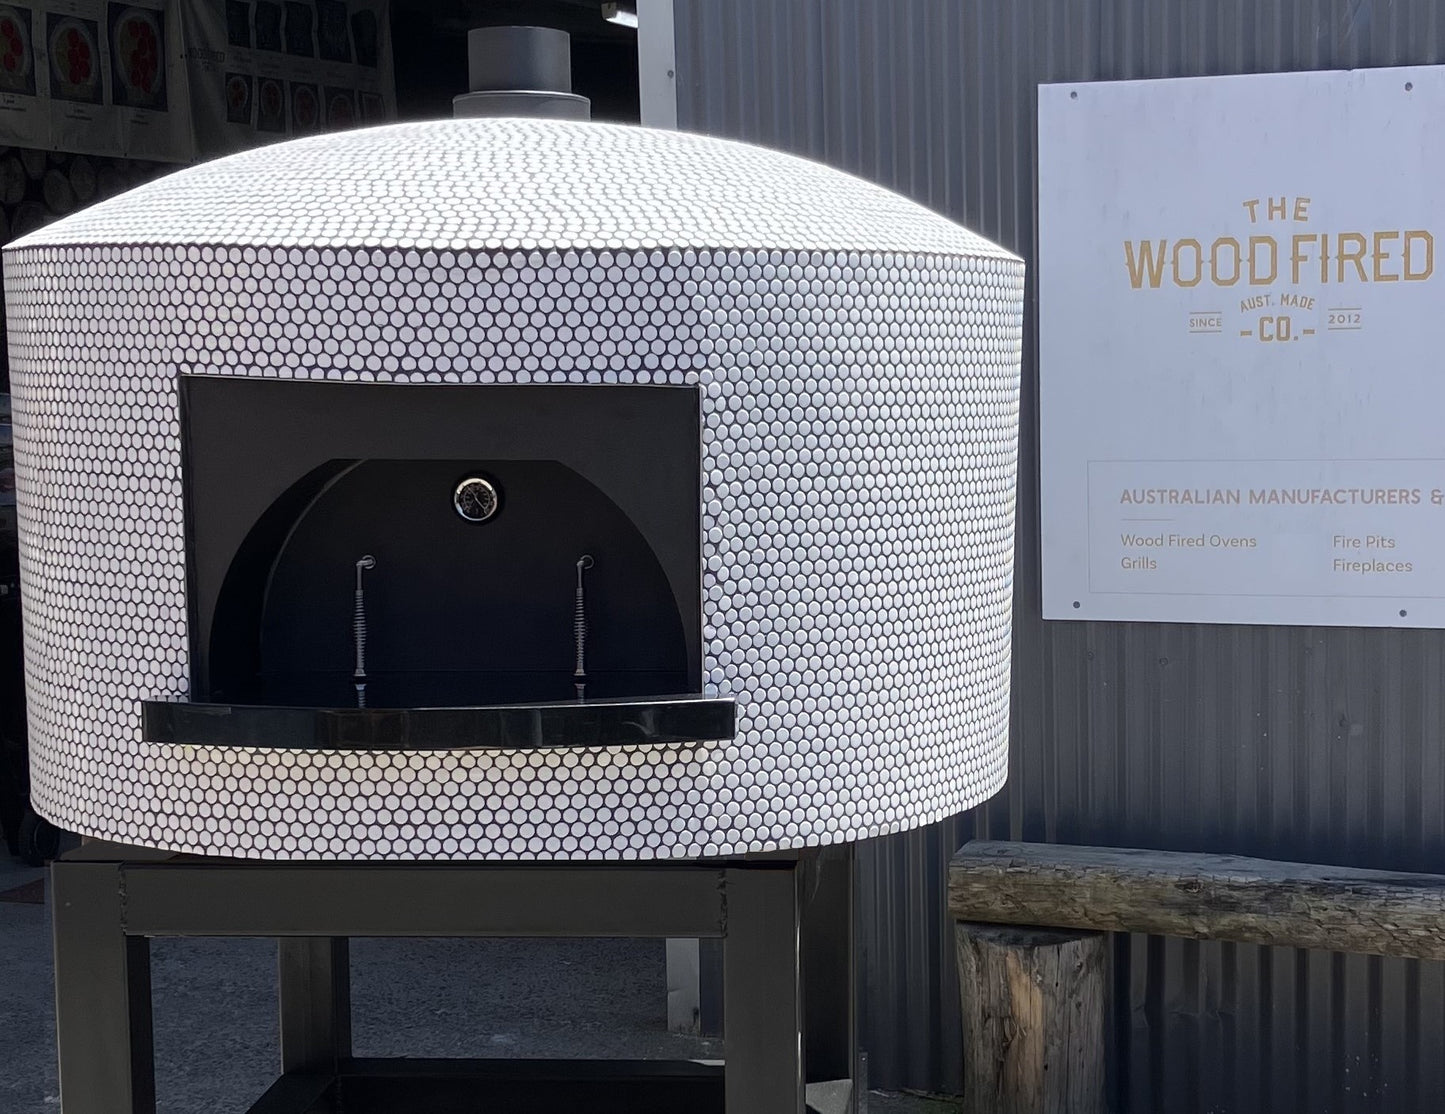 Fiero 950 Napoli style commercial pizza oven - The Woodfired Co